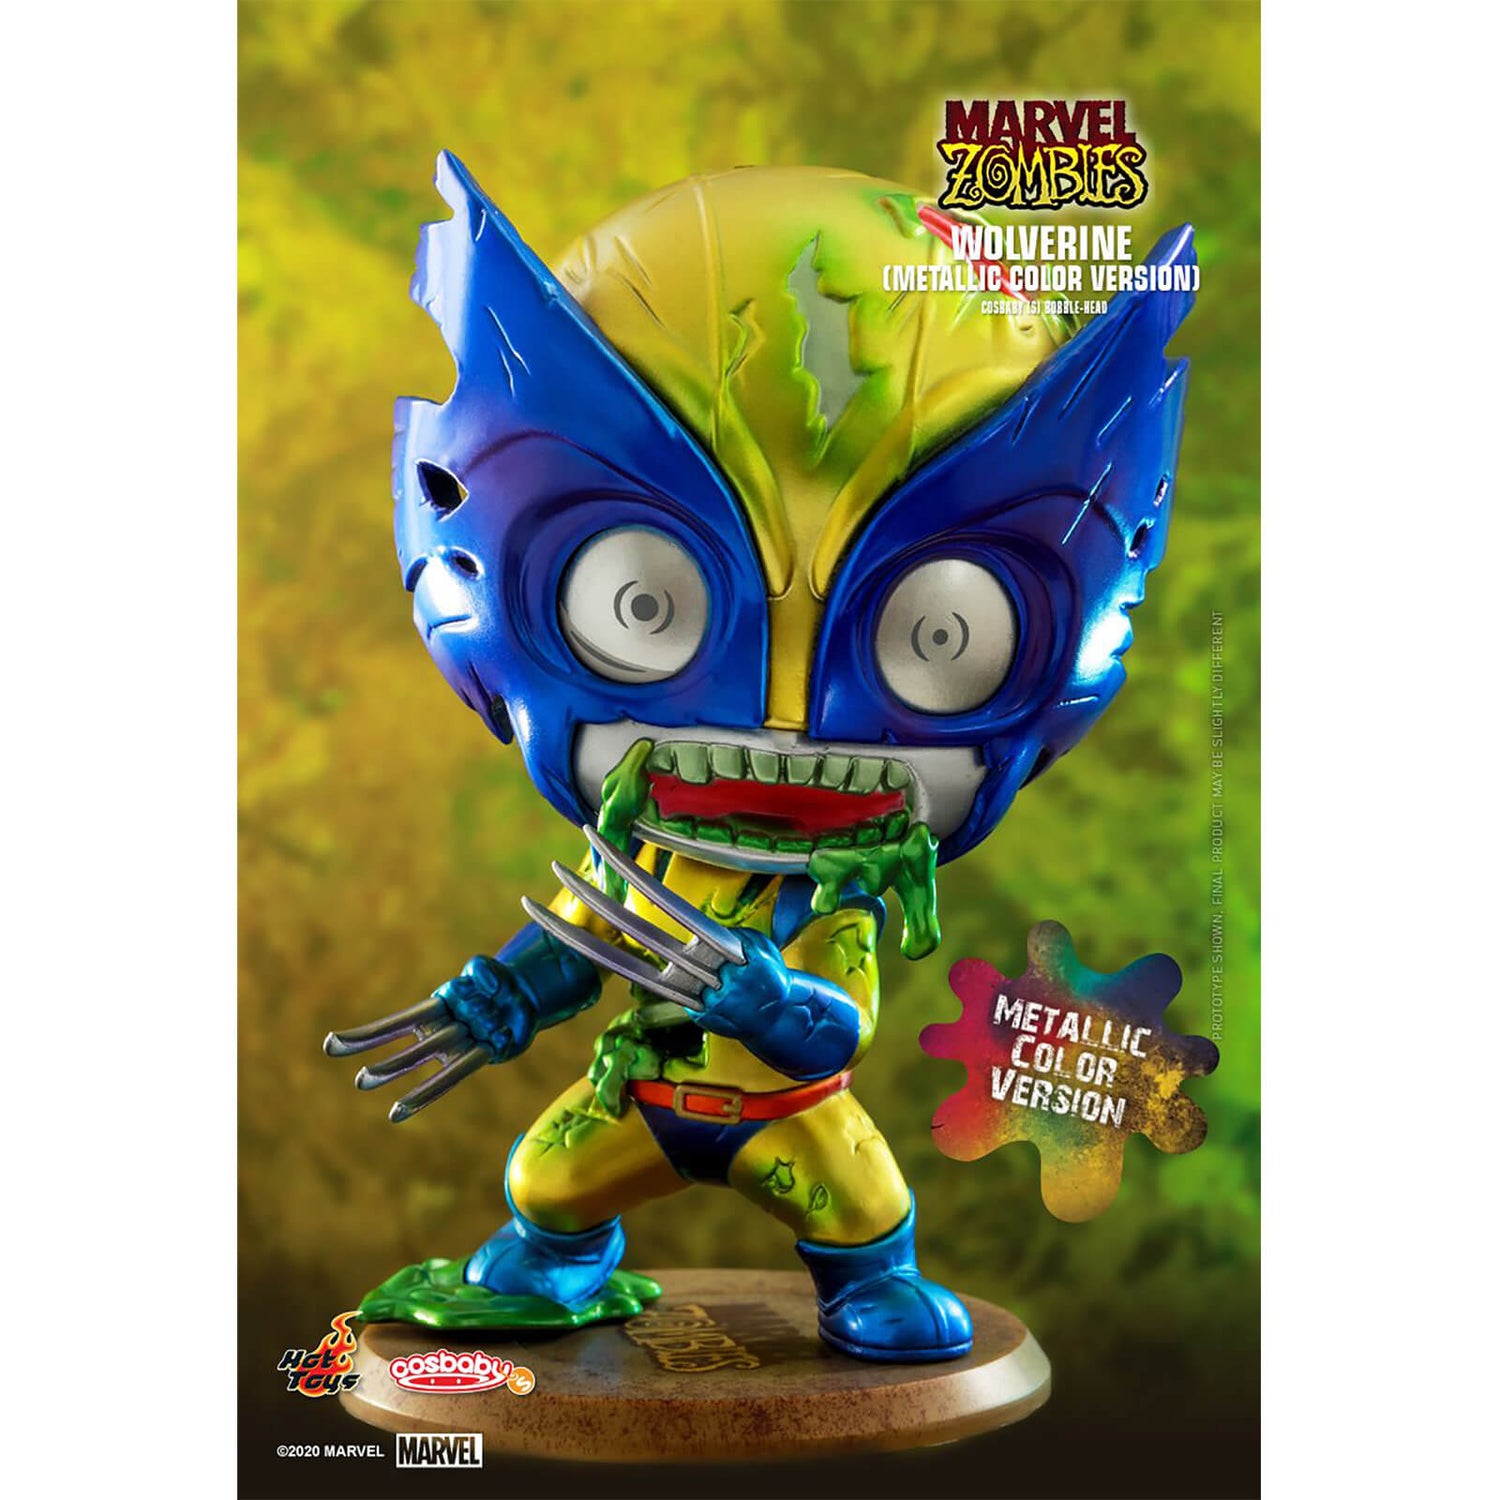 Hot Toys Cosbaby Marvel Comics [Size S] - Marvel Zombies: Wolverine (Metallic Colour Version)